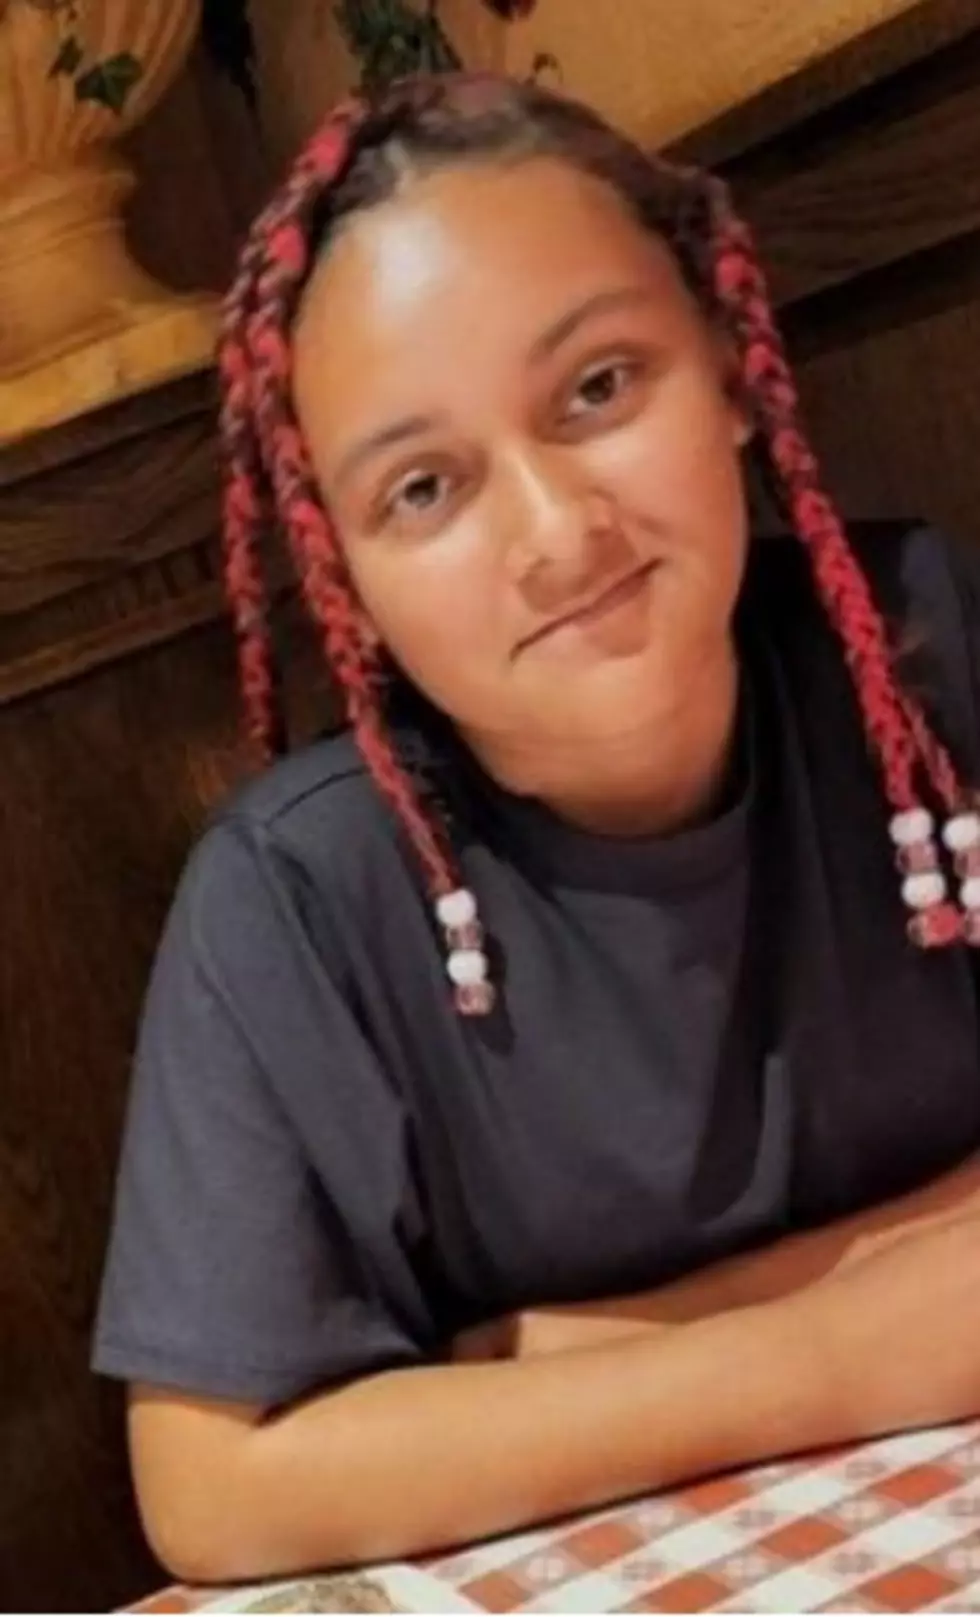 (UPDATED) 11-Year-Old Girl Found Safe in Mille Lacs County